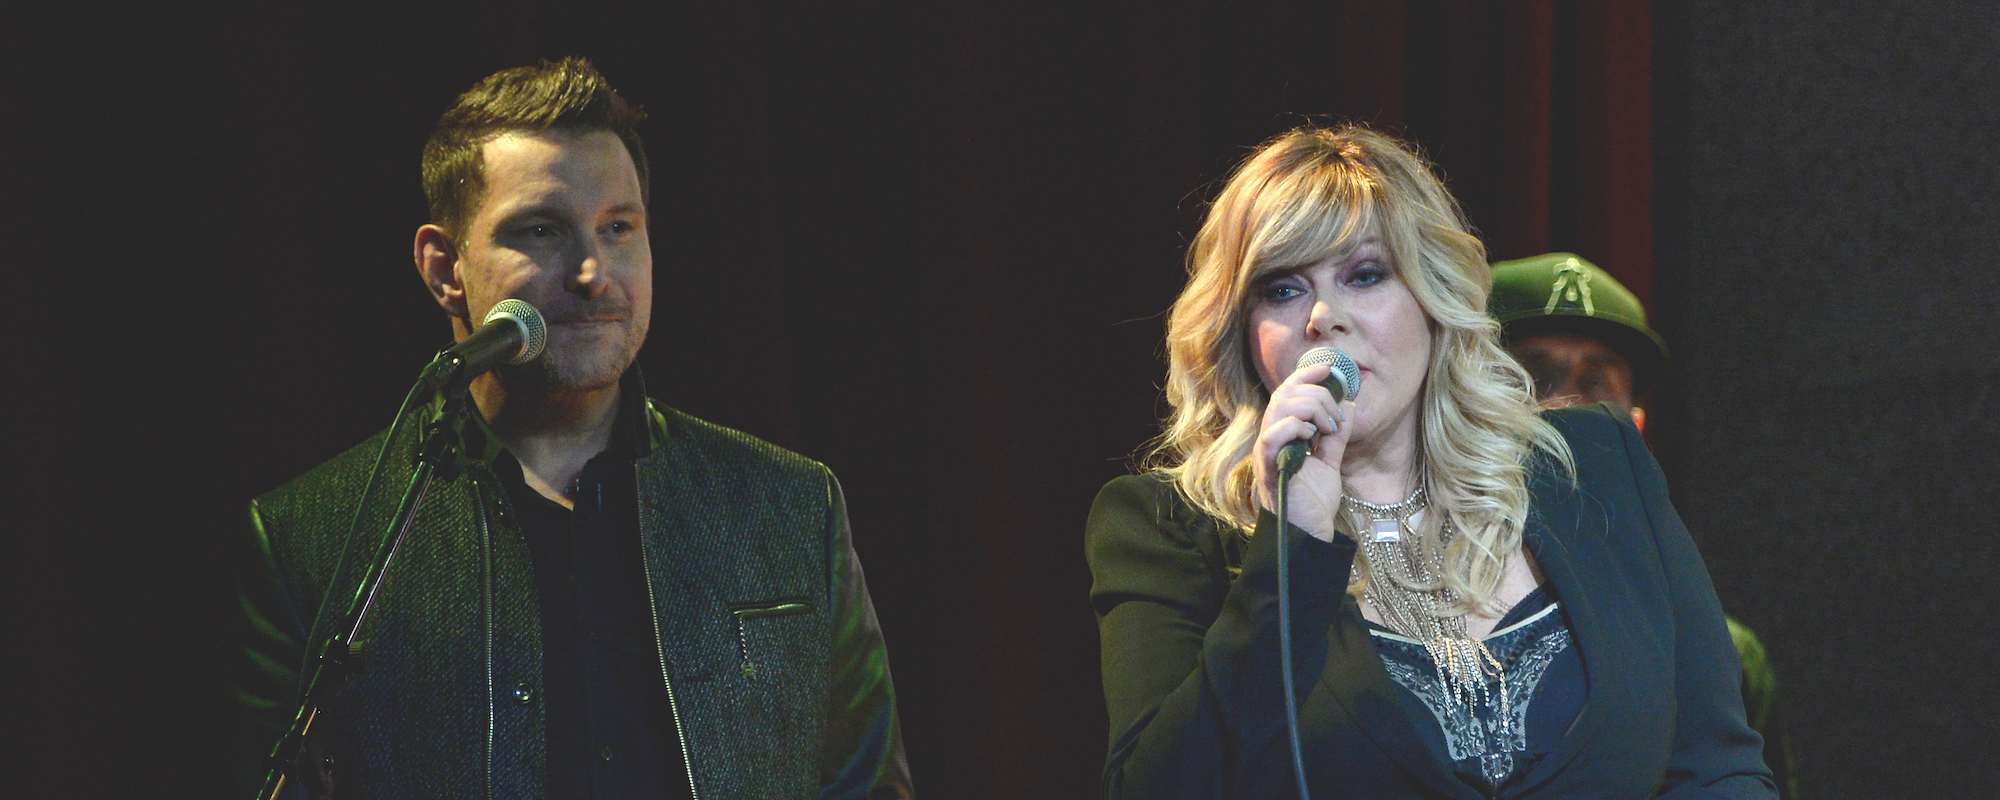 Jamie O’Neal and Ty Herndon Yearn for Togetherness In “Merry Christmas Baby” [Exclusive Premiere]